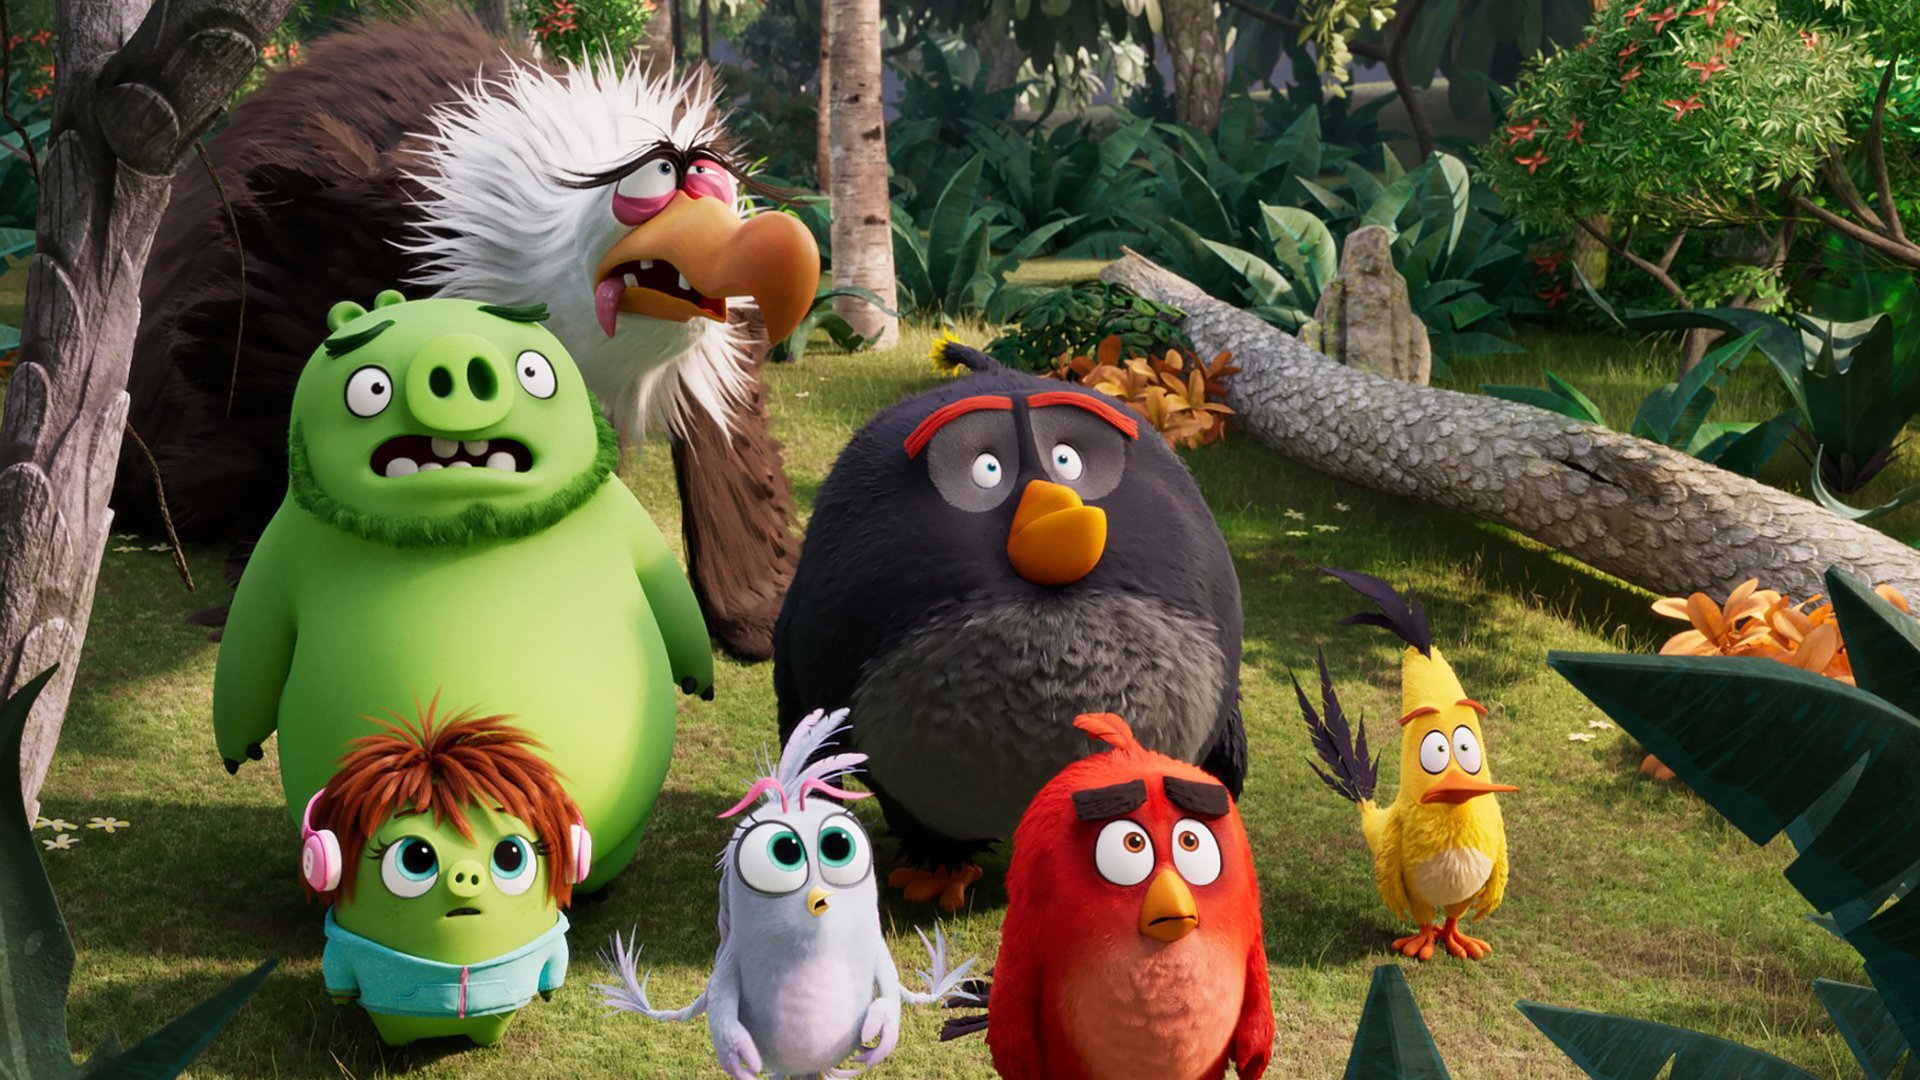 The Angry Birds Movie 2 will be in cinemas from August 2nd in the UK (US moviegoers will have to wait until August 14th), and Sony Picture have just. Angry Birds Movie 2 trailer. Movies For Kids Birds Movie 2 Silver Wallpaper